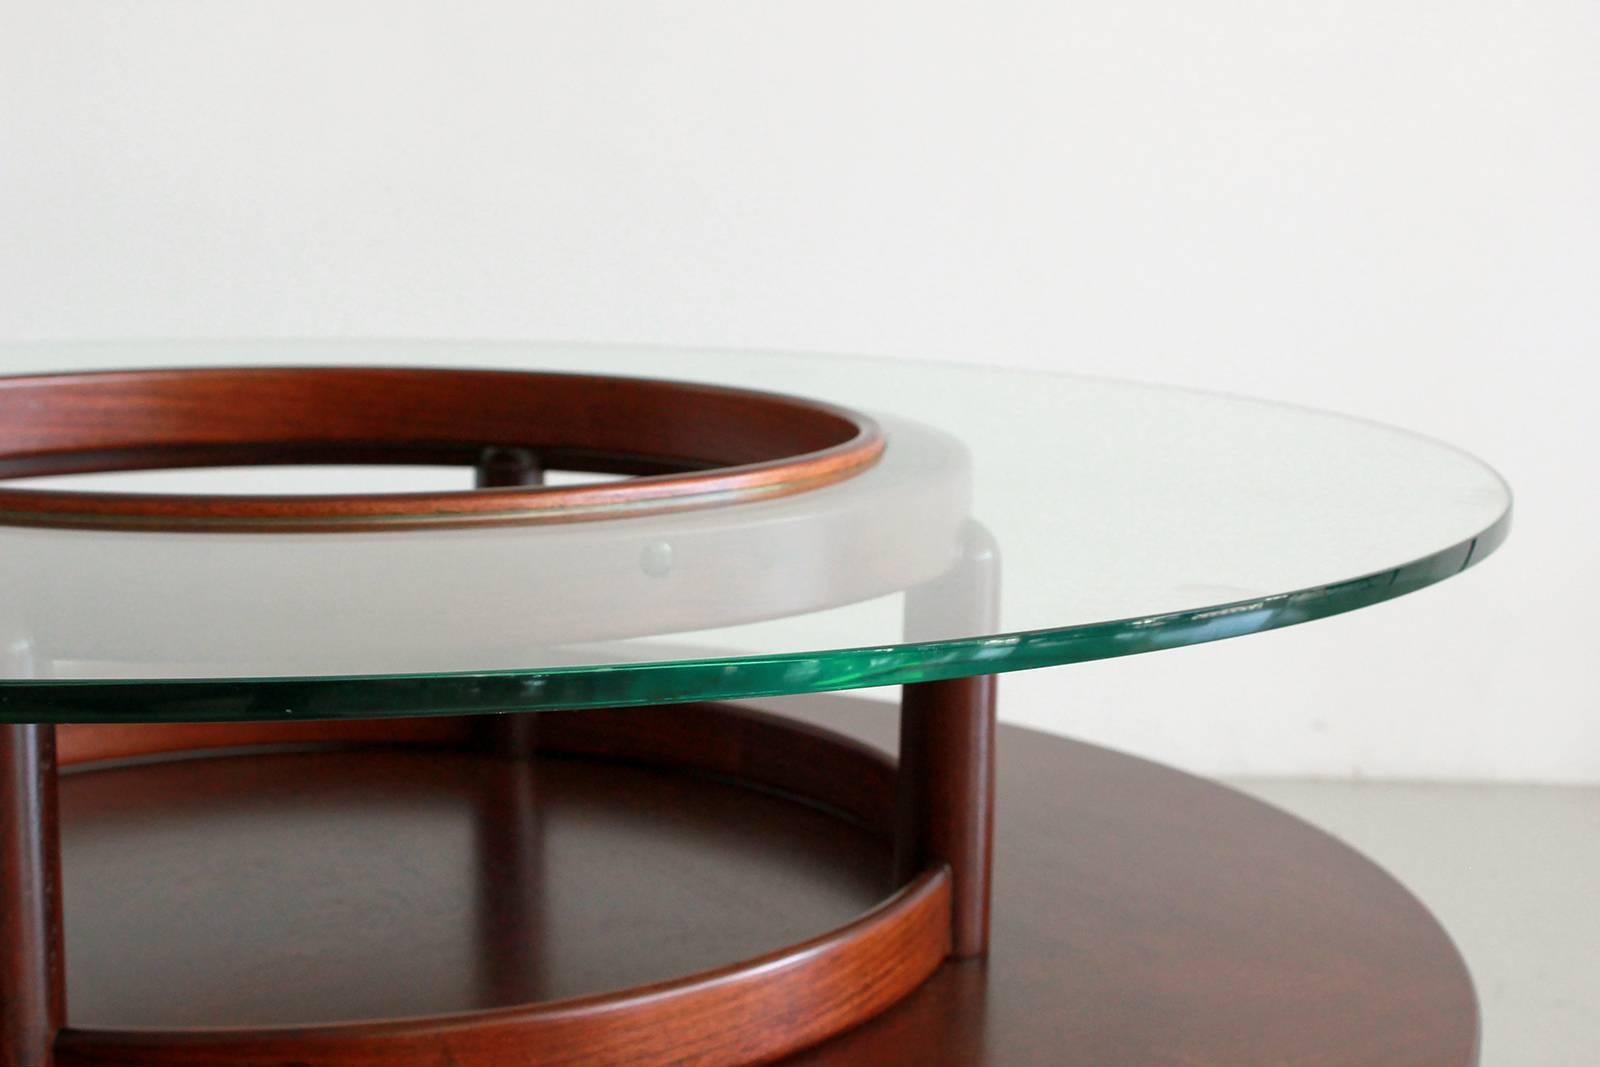 Exquisite Italian mahogany and floating glass table.